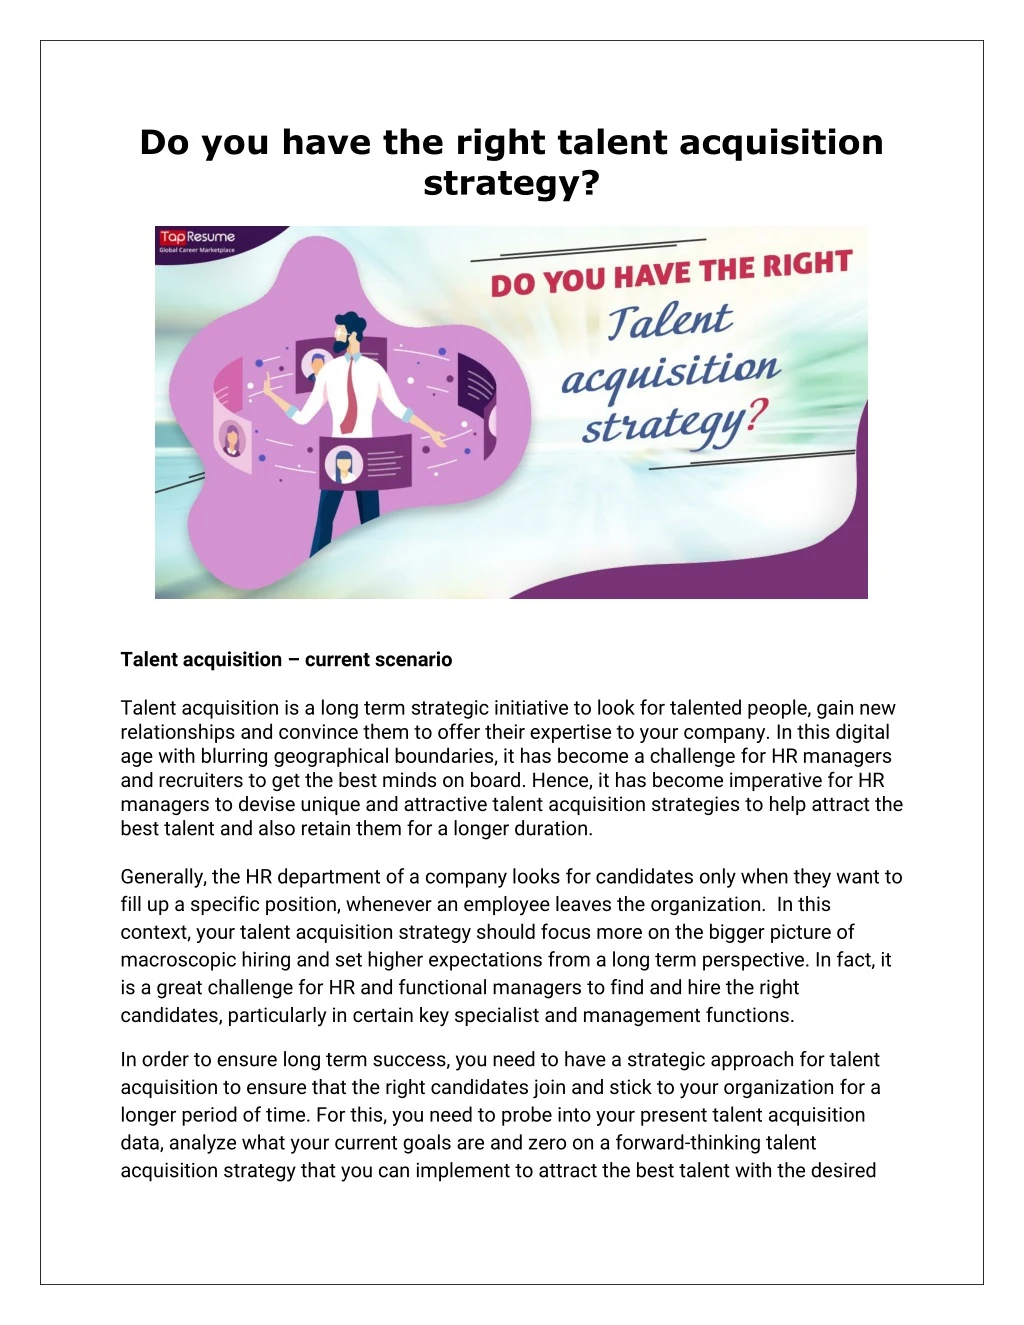 do you have the right talent acquisition strategy